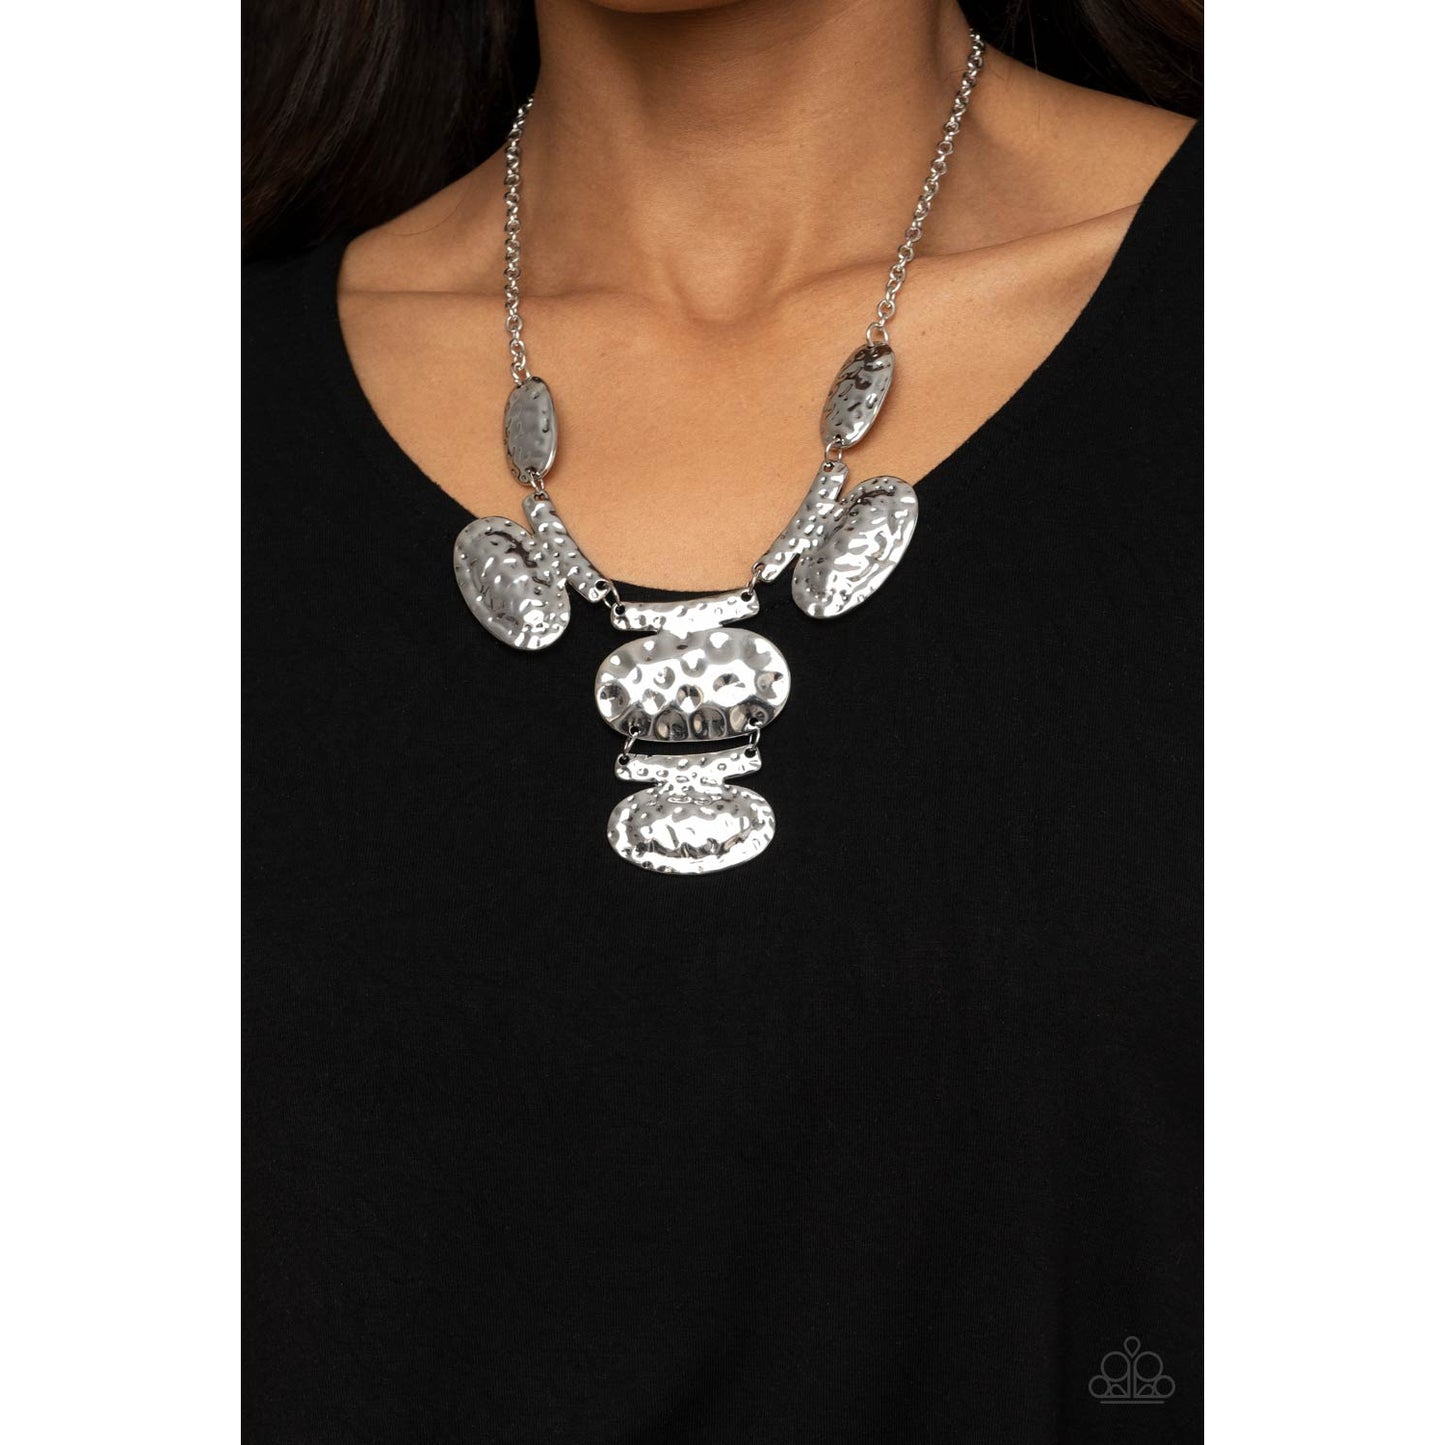 Gallery Relic - Silver Necklace - Paparazzi Accessories - GlaMarous Titi Jewels